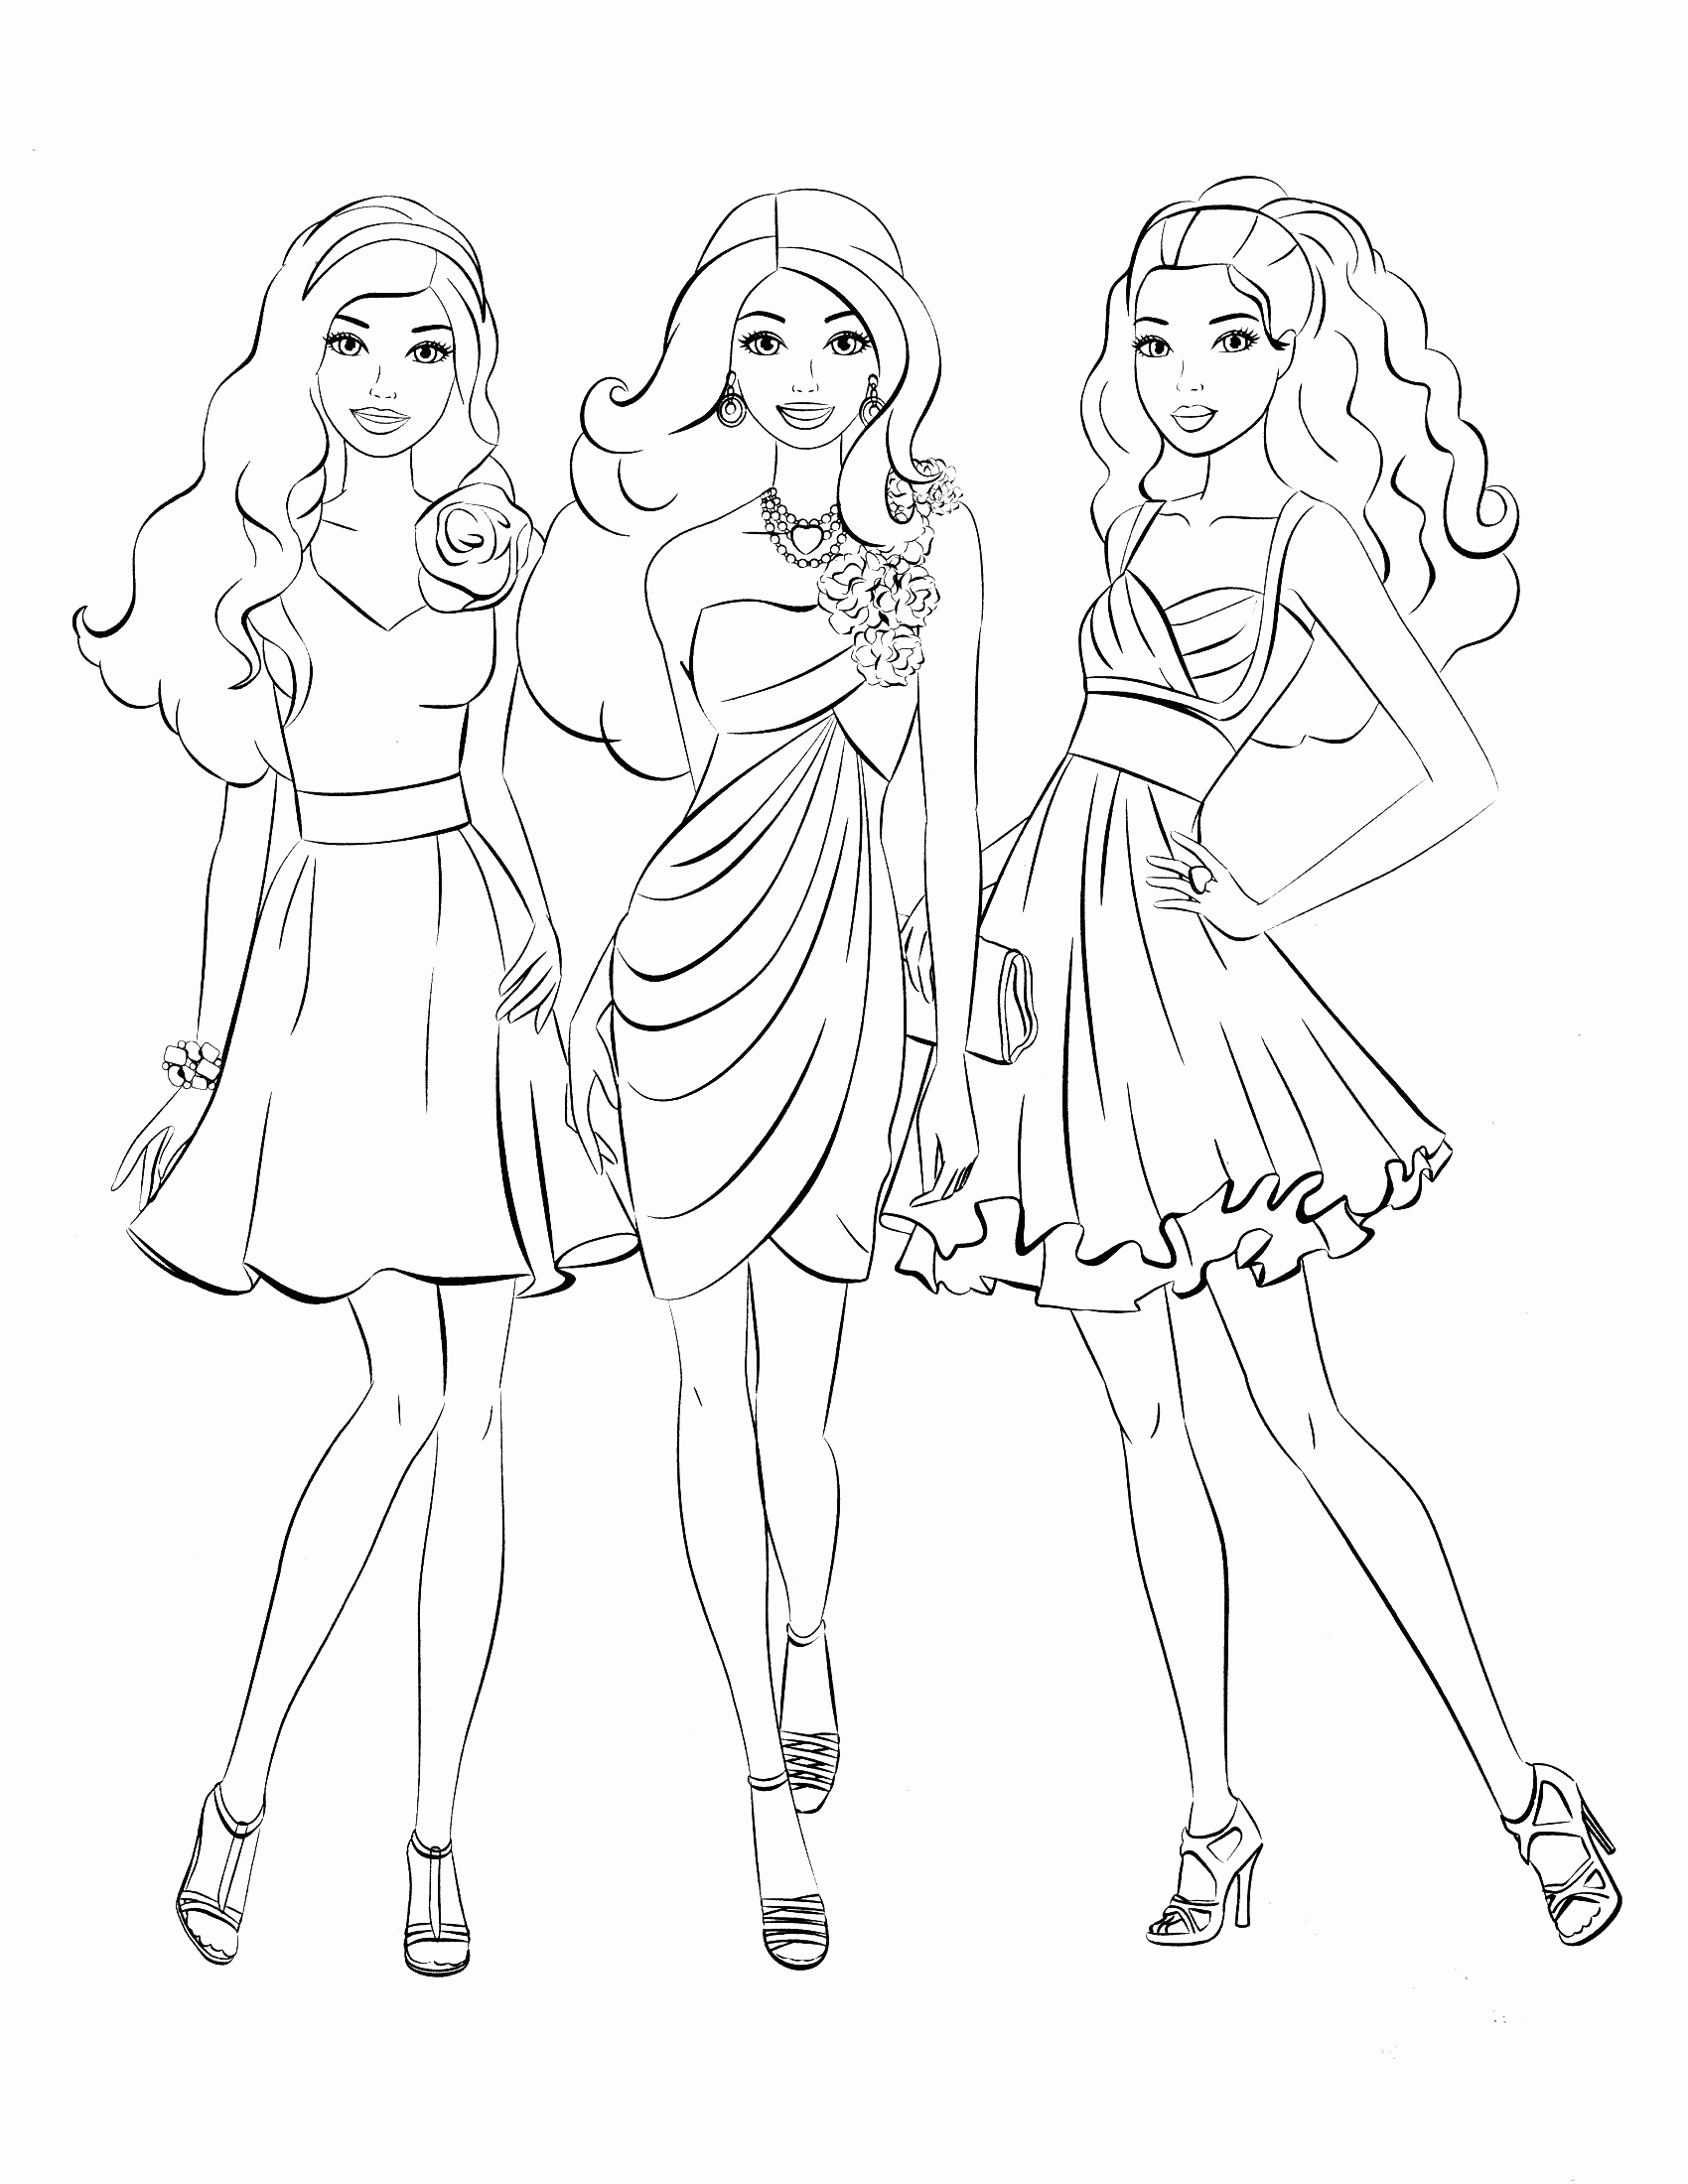 barbie stencil template free download | Barbie coloring, Doll drawing,  Princess coloring pages